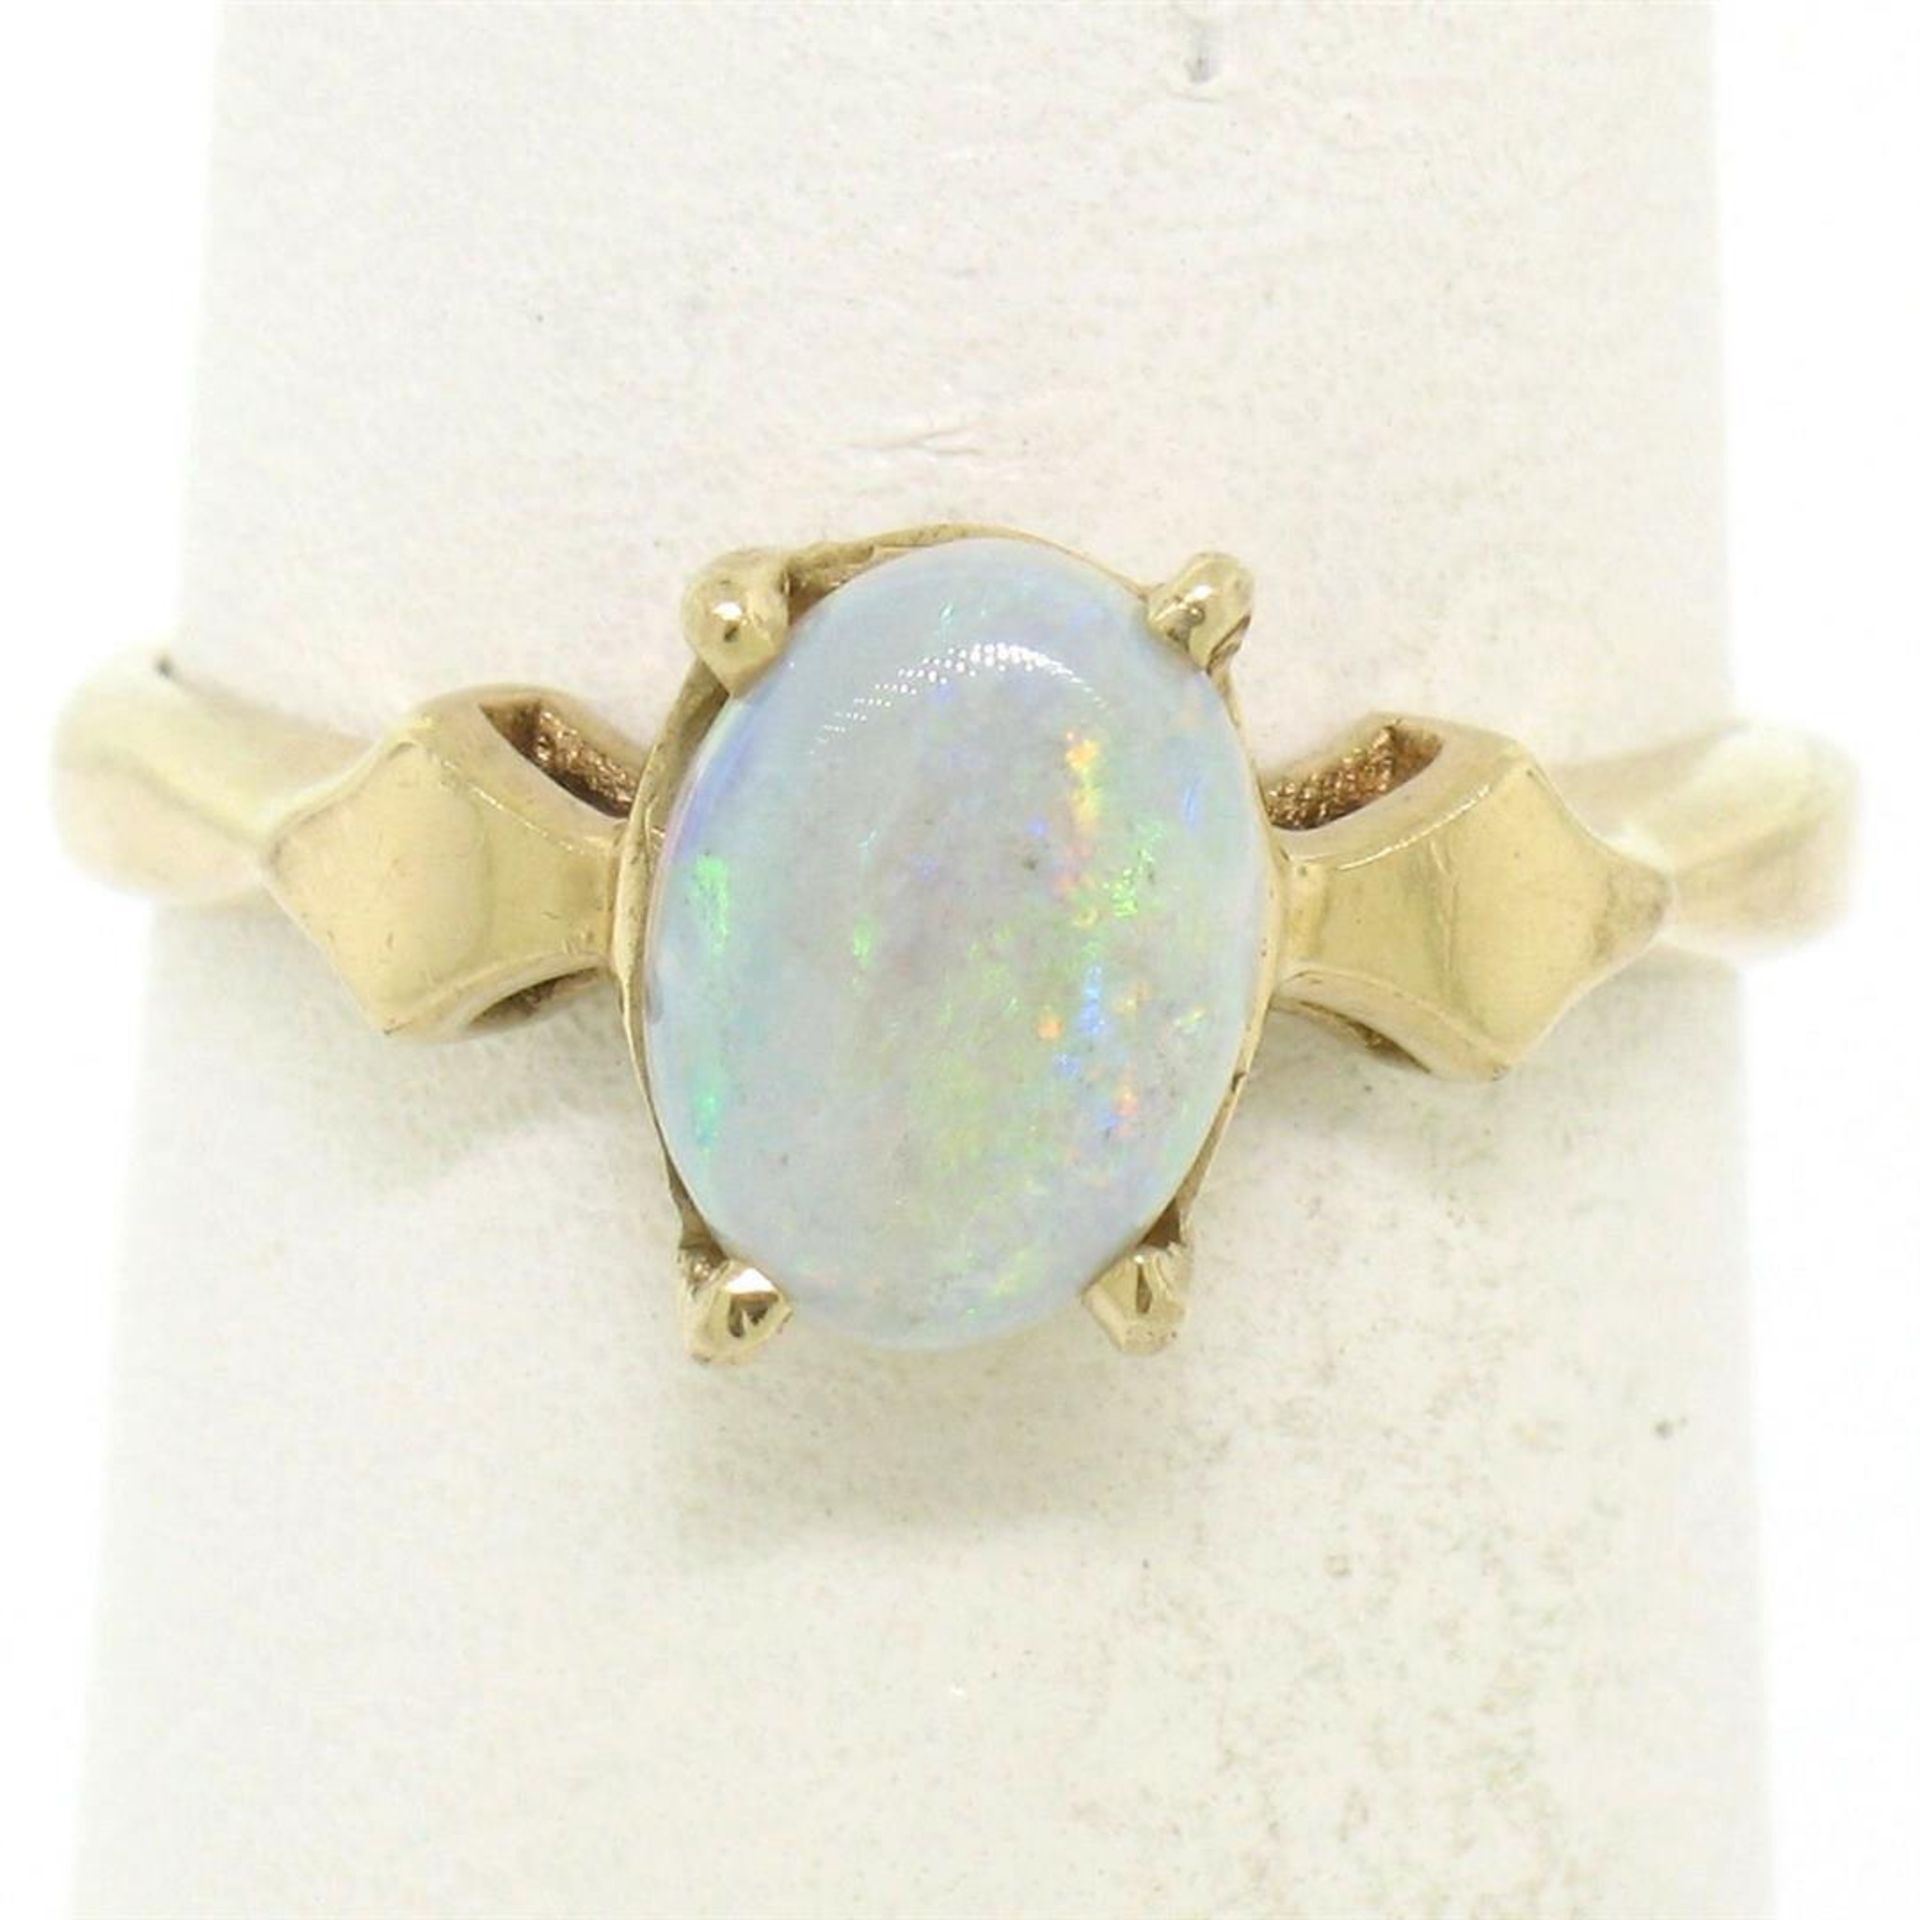 Vintage 14K Yellow Gold 0.65ct Petite Oval Cabochon Opal Solitaire Ring Size 6 - Image 2 of 9